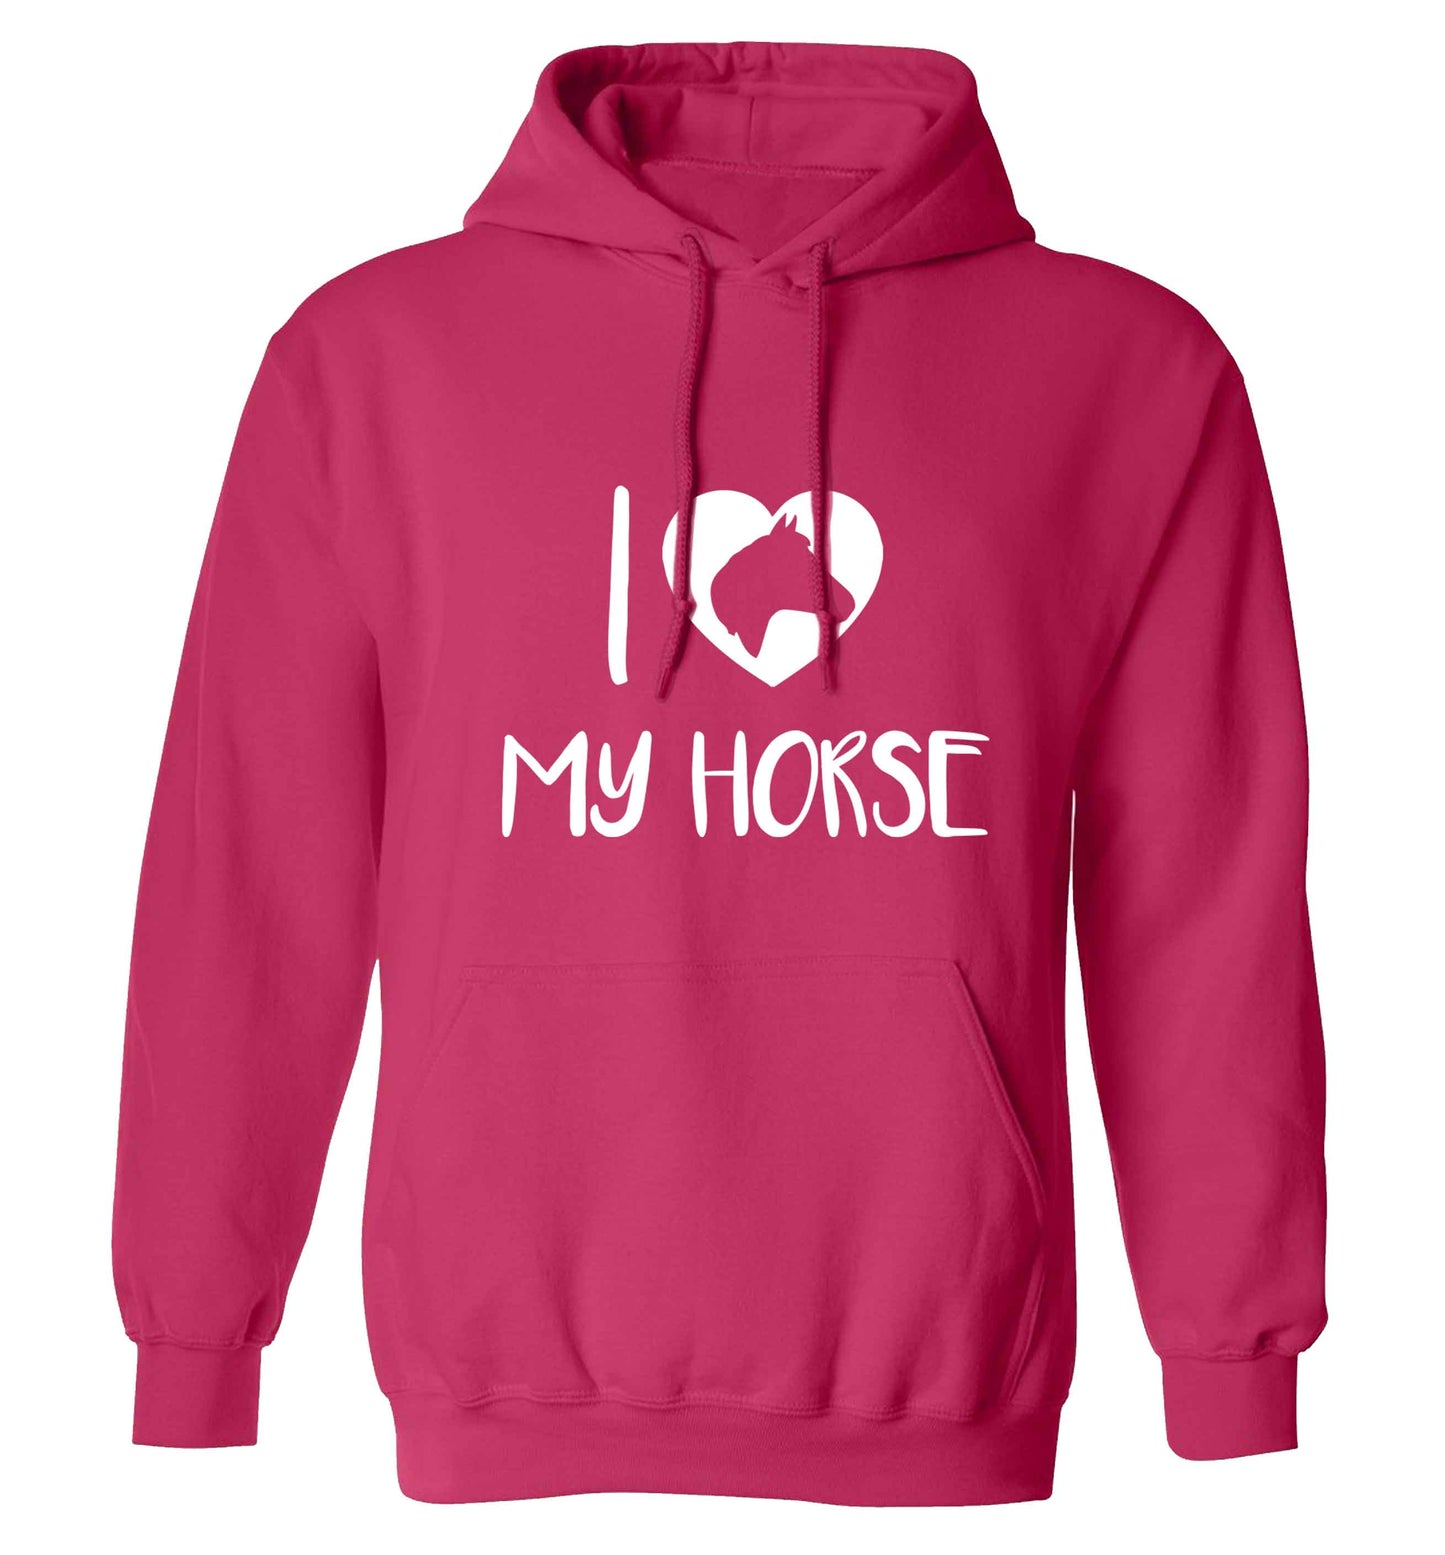 I love my horse adults unisex pink hoodie 2XL